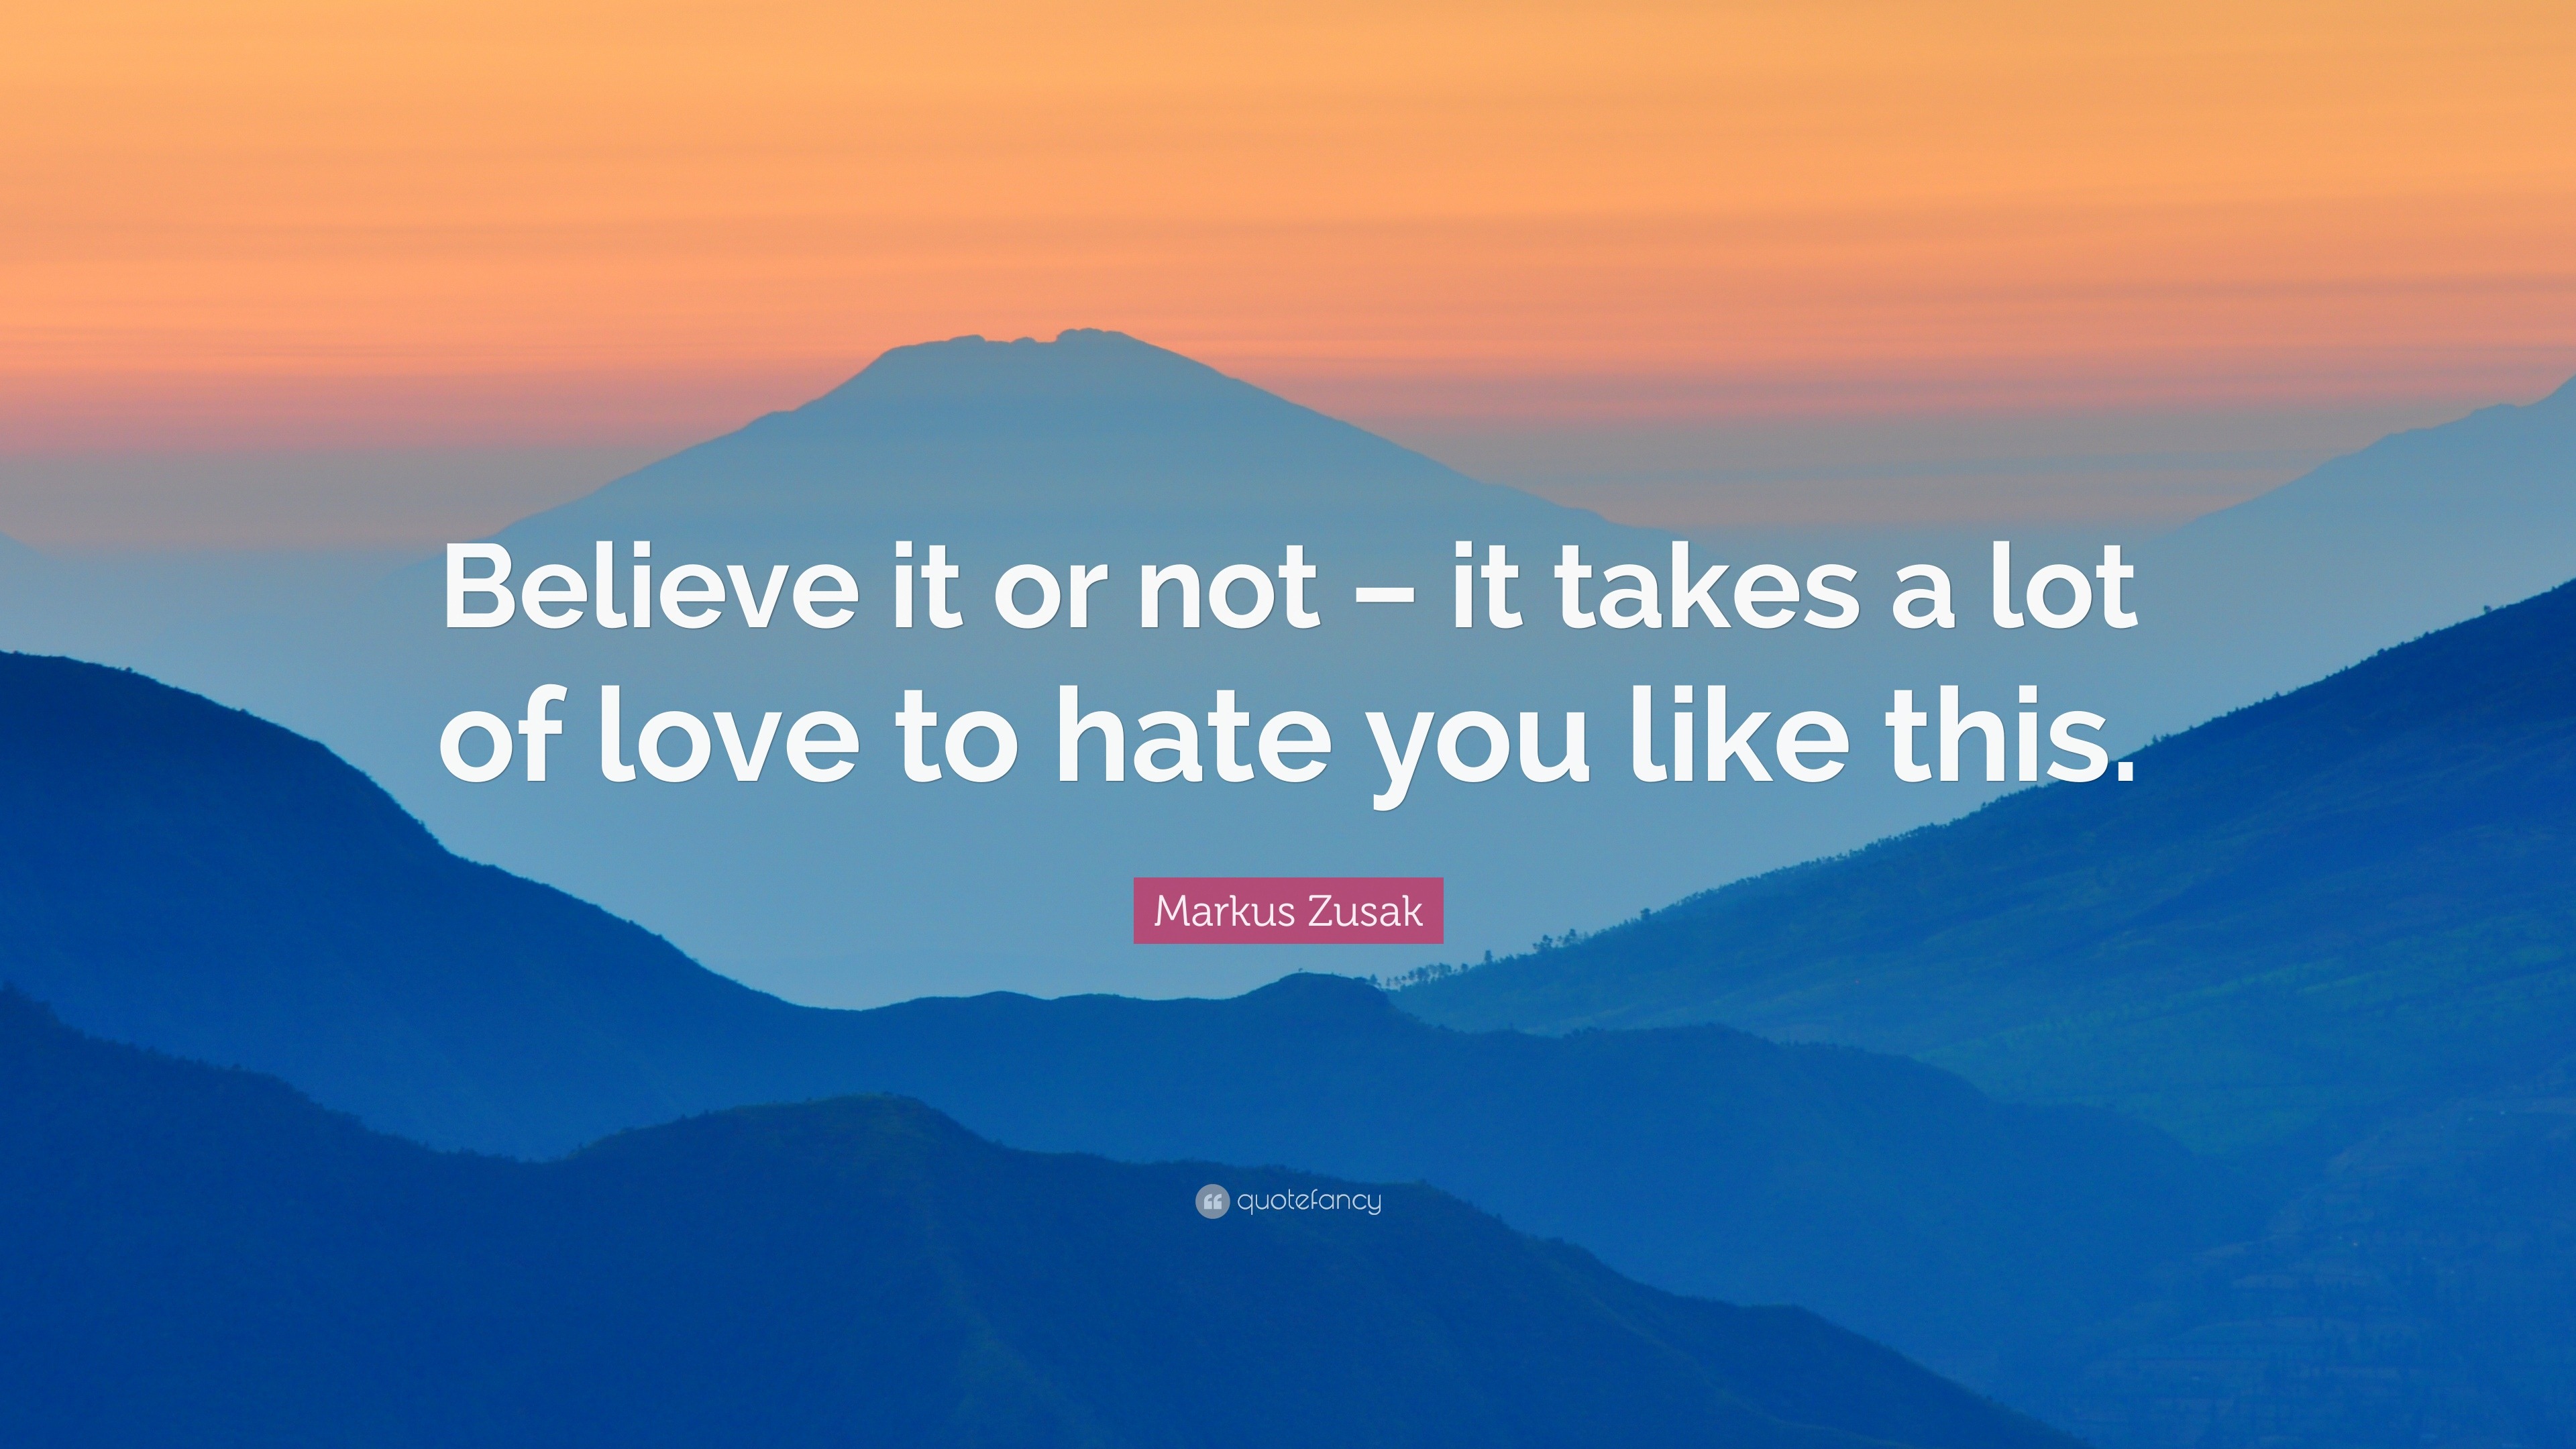 Markus Zusak Quote “Believe it or not – it takes a lot of love